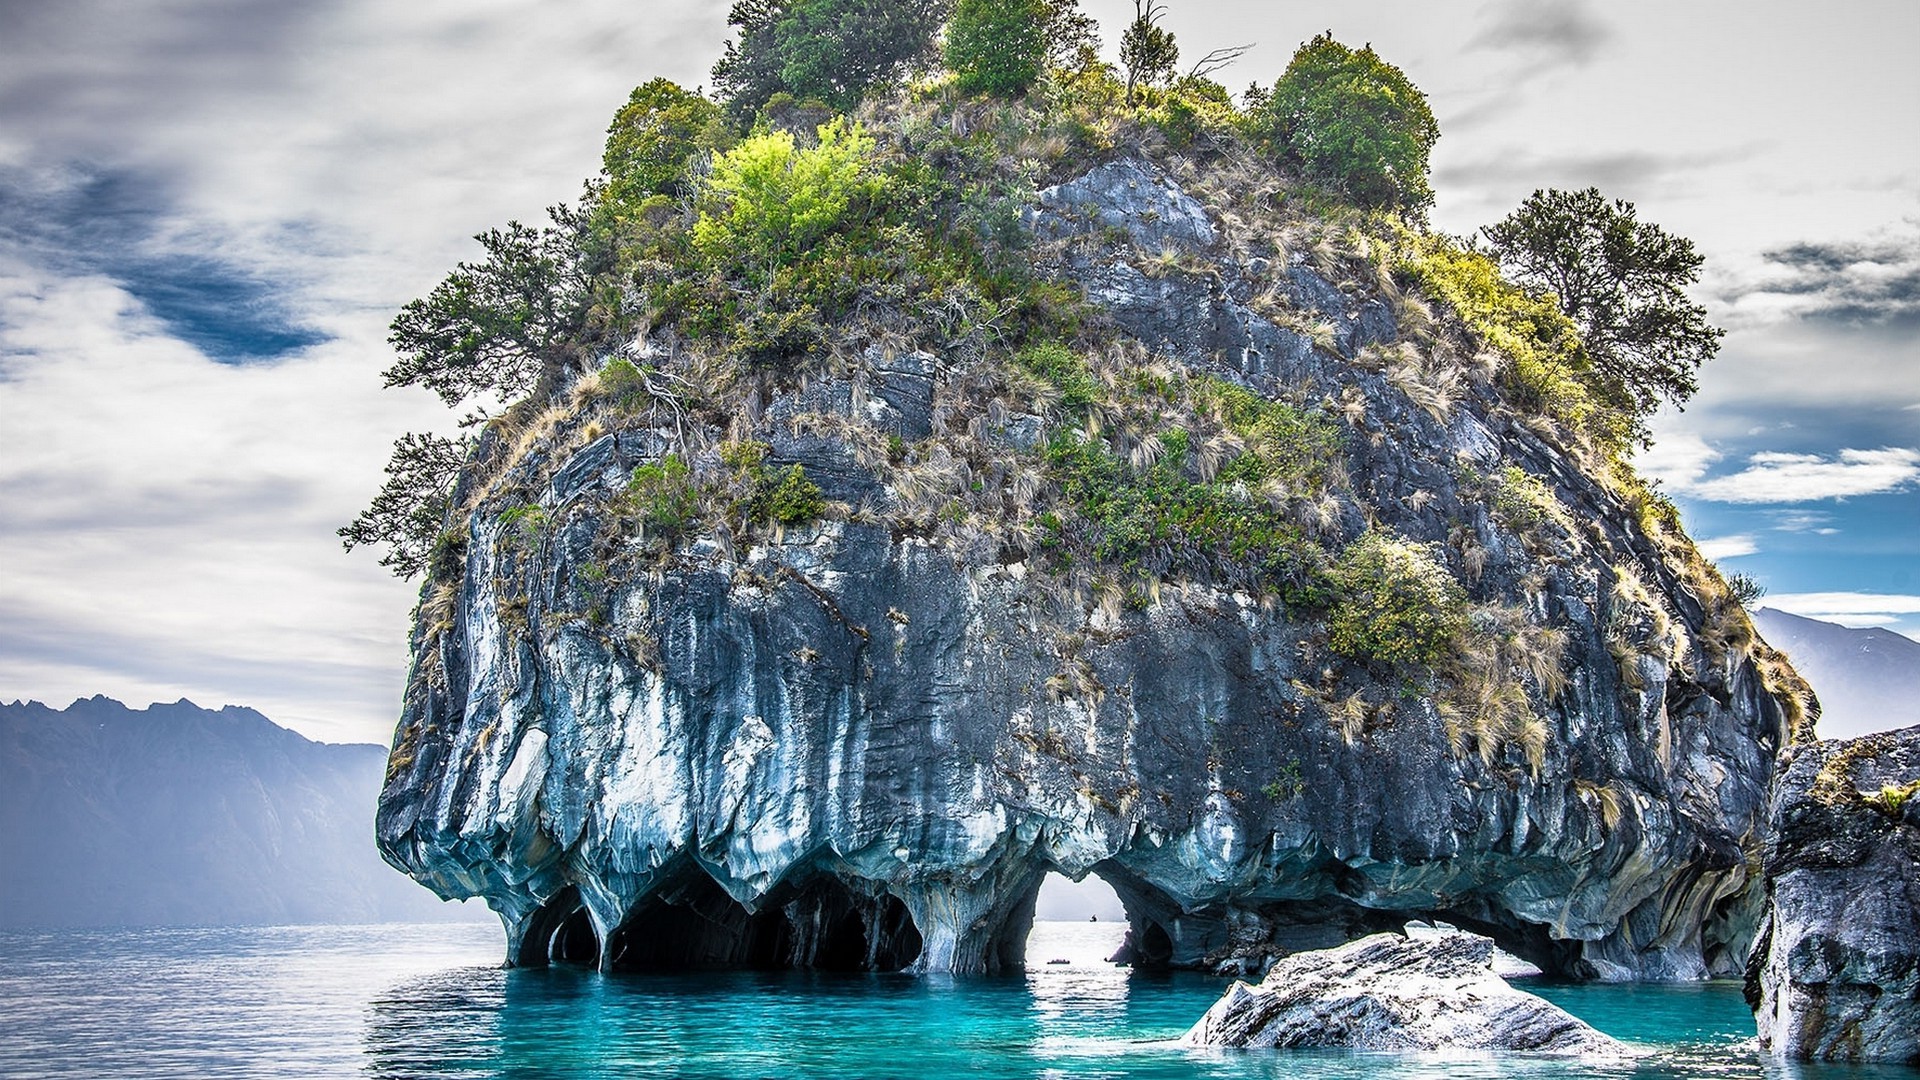 nature, Landscape, Cathedral, Rock, Lake, Island, Trees, Shrubs, Patagonia, Chile, Erosion, Cave, Turquoise, Water Wallpaper